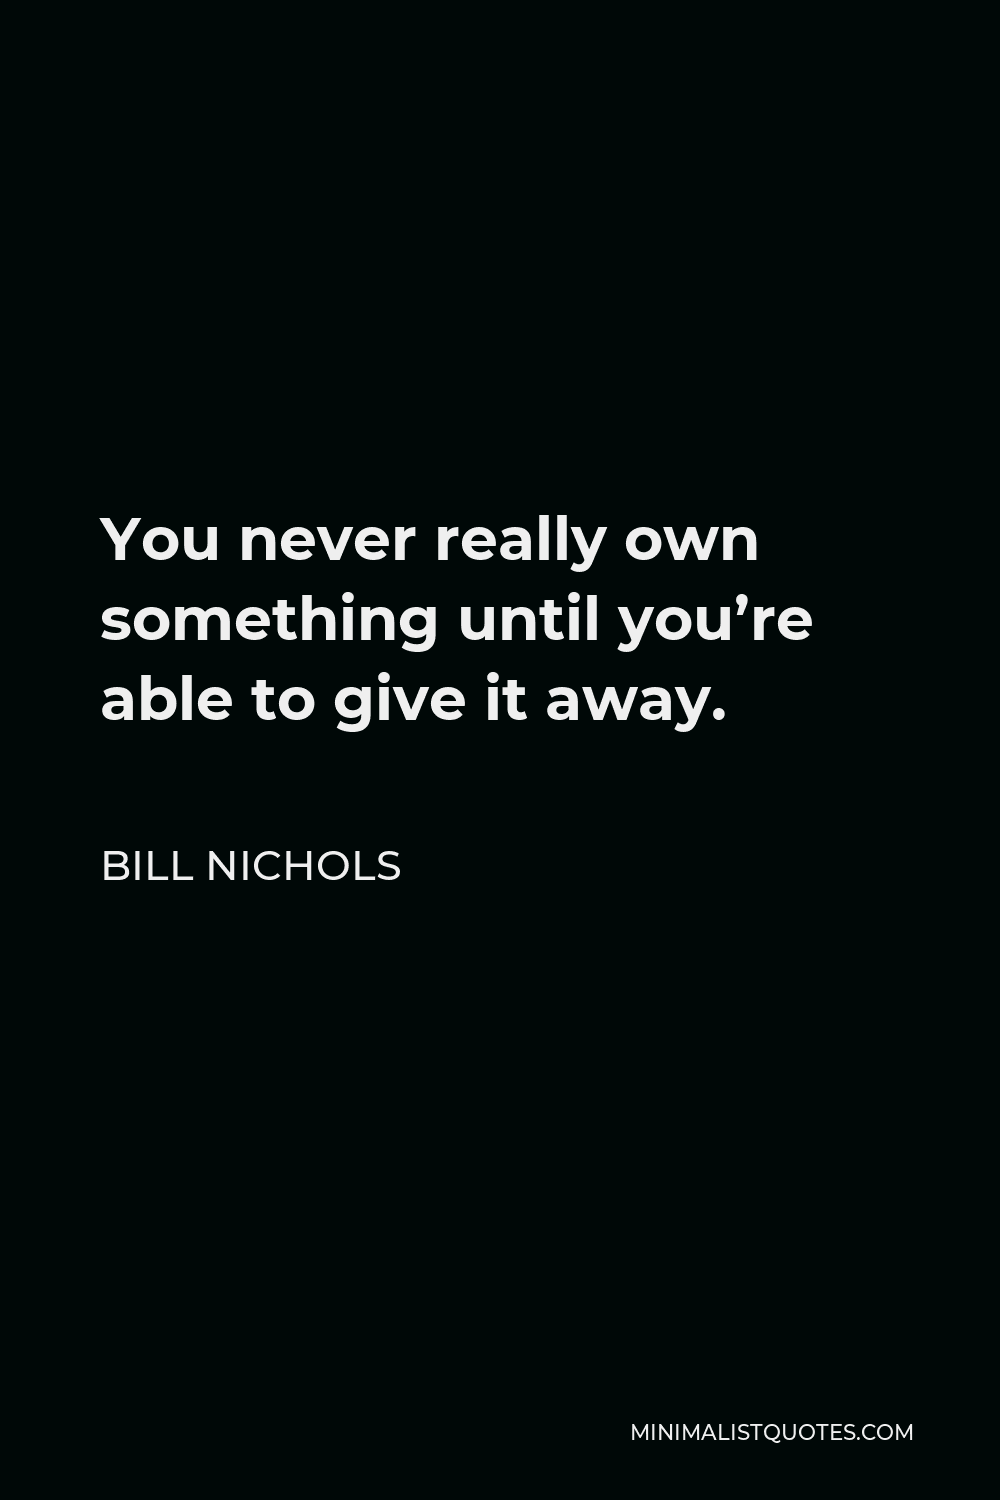 Bill Nichols Quote - You never really own something until you’re able to give it away.